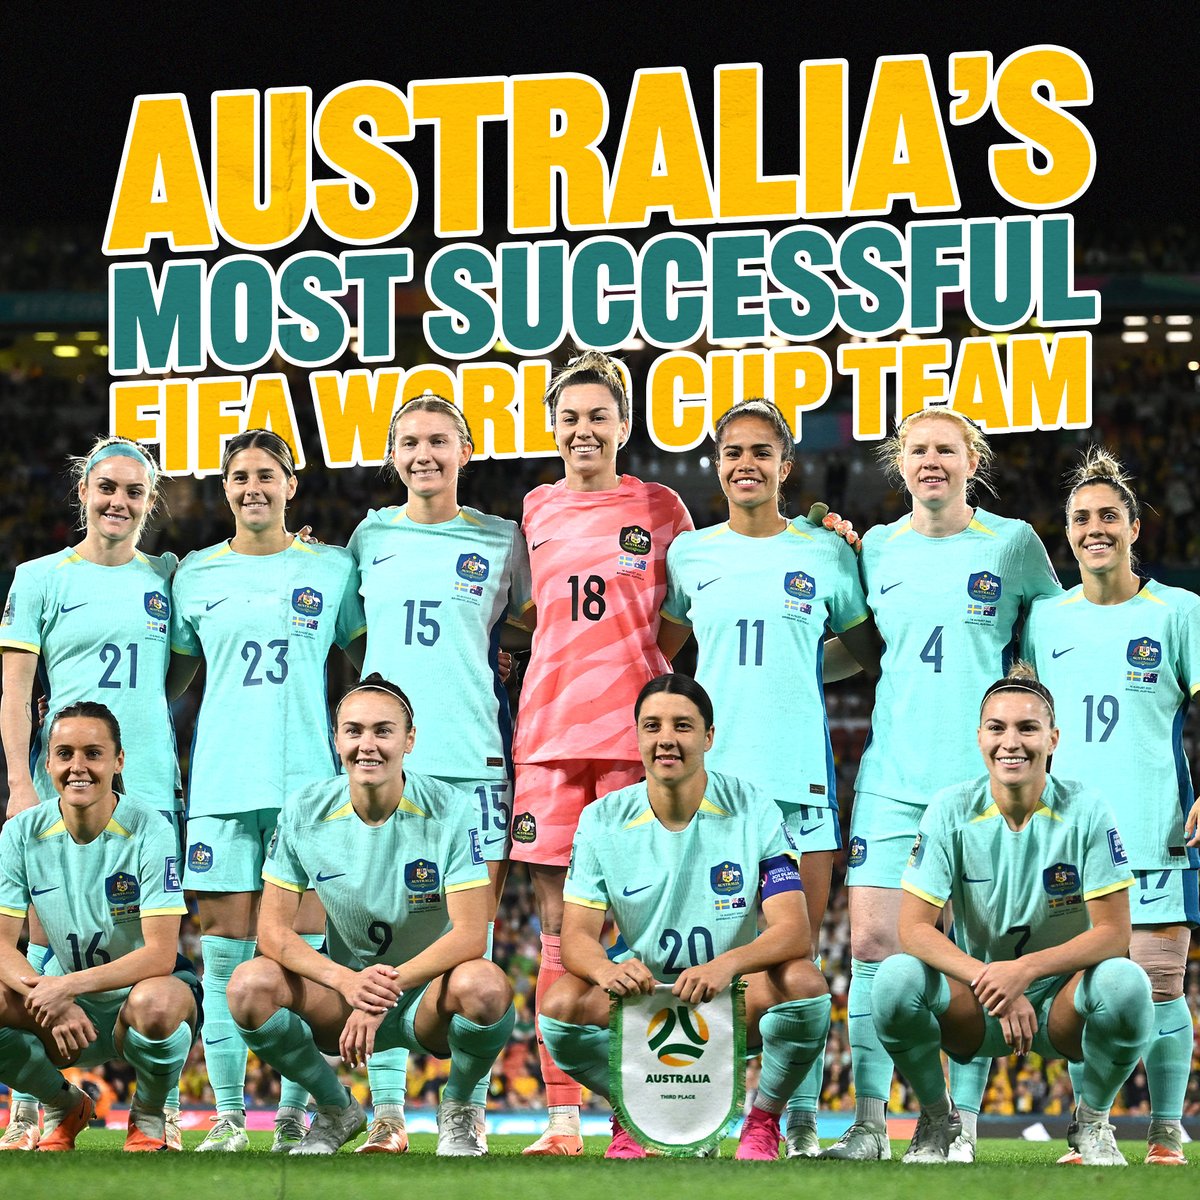 It wasn’t to be – but tonight the Matildas can hold their heads up high. Their record on the pitch is unmatched and Australia couldn't be prouder 💚💛💚